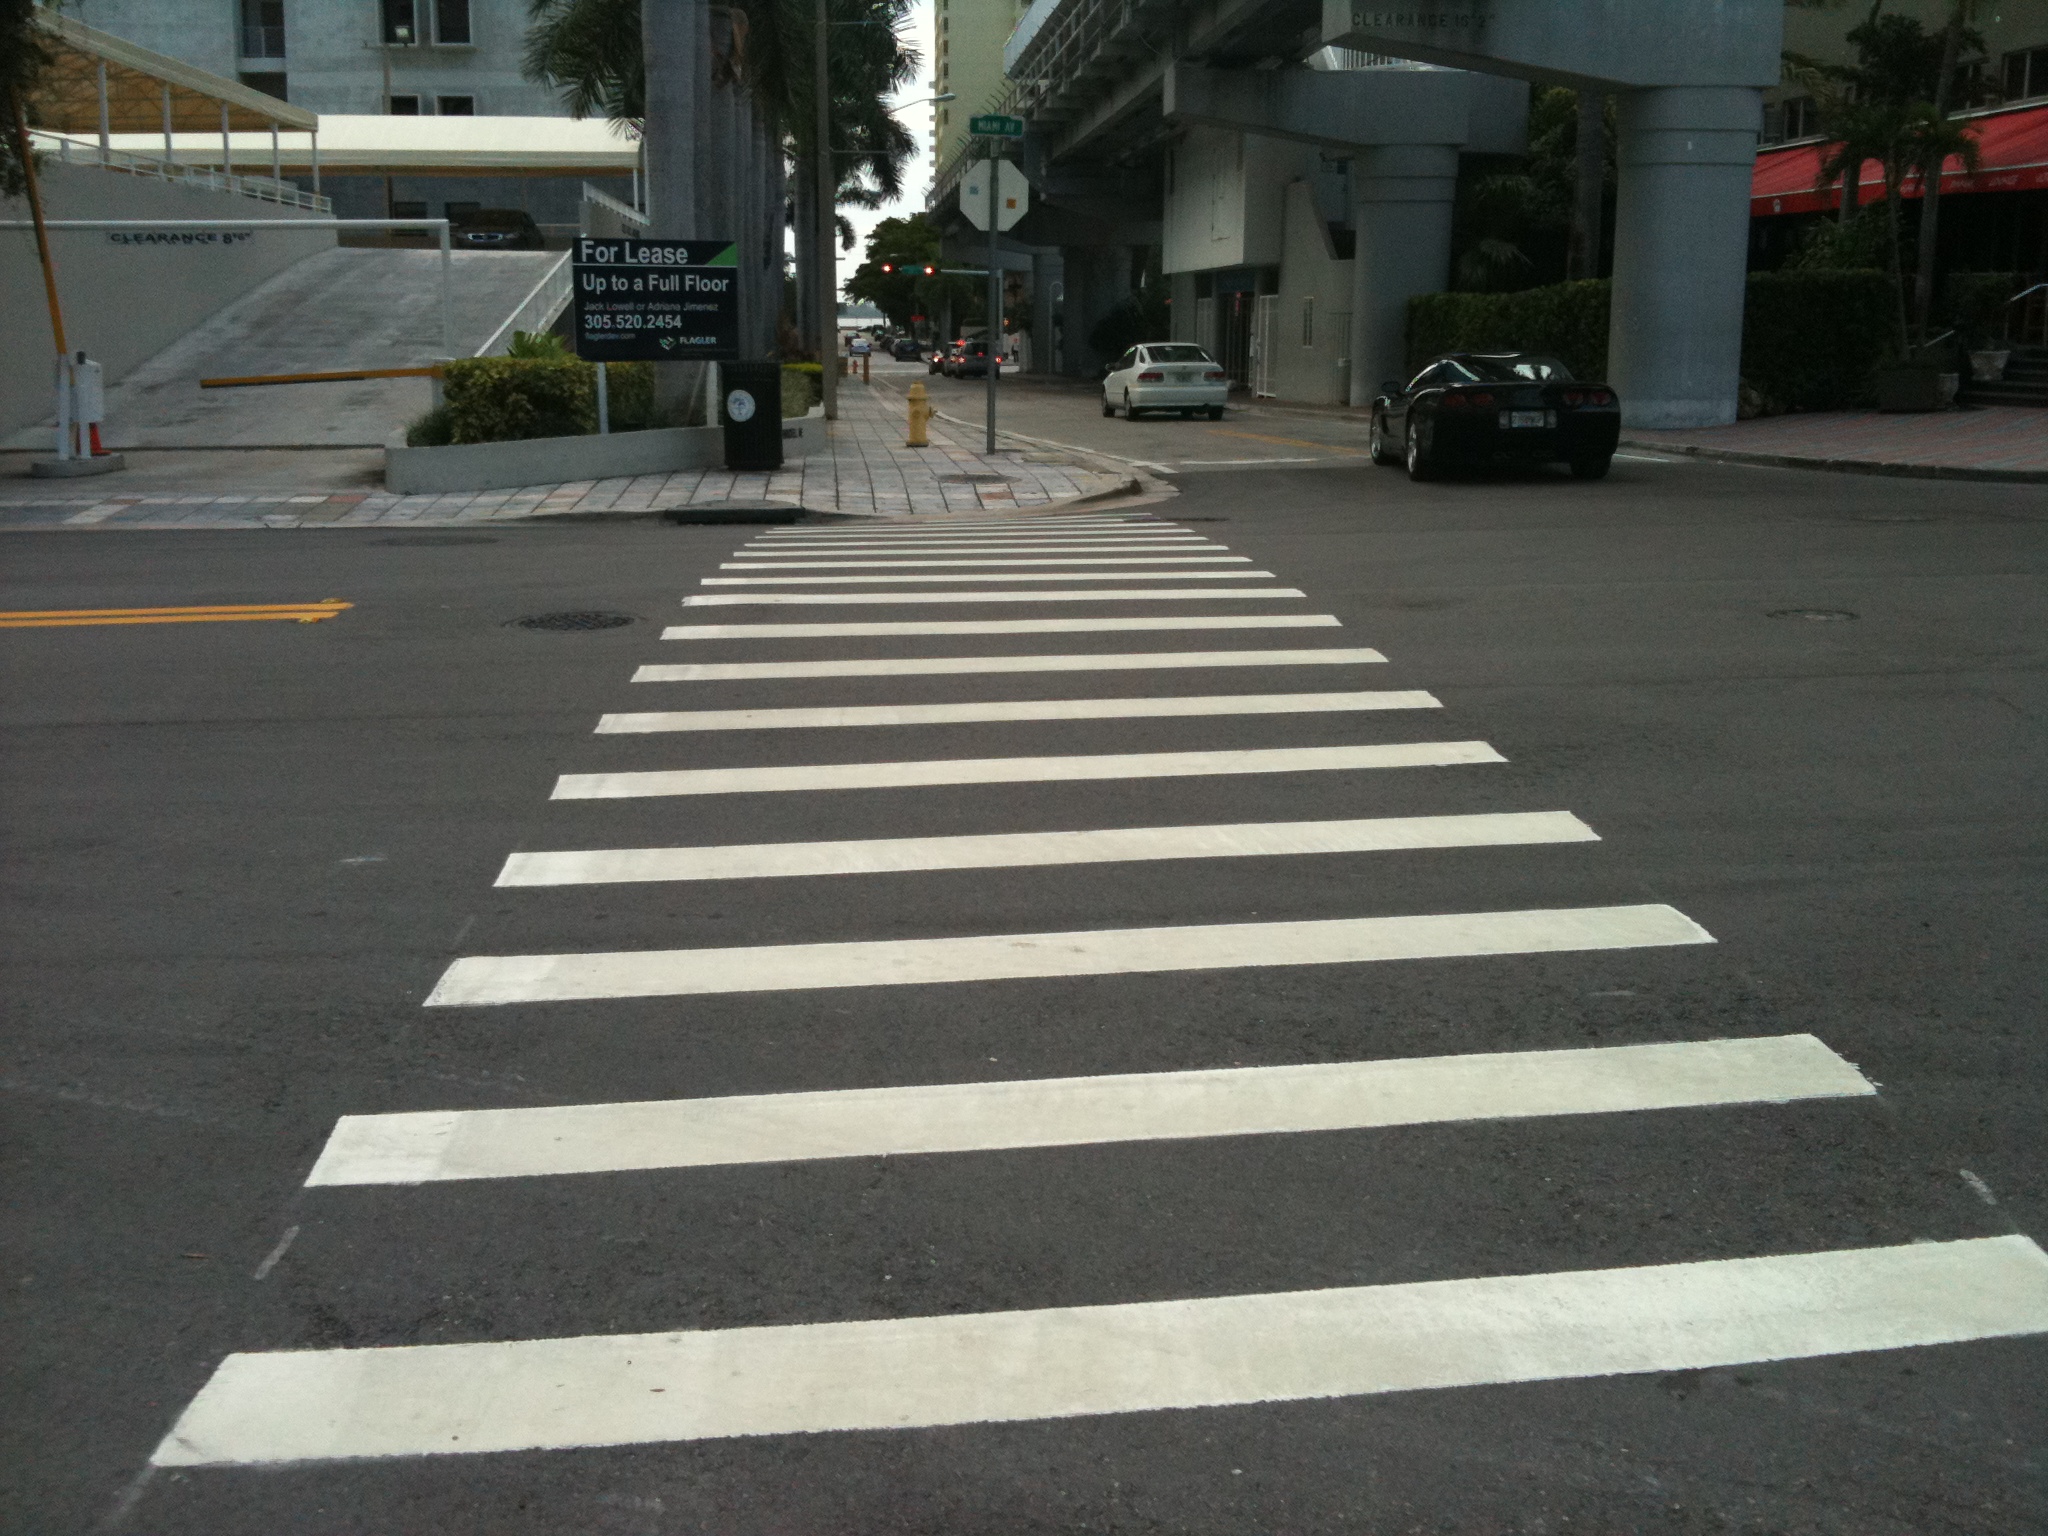 Crosswalk Detection in OpenCV (28 Days of Hacking: Day 9)